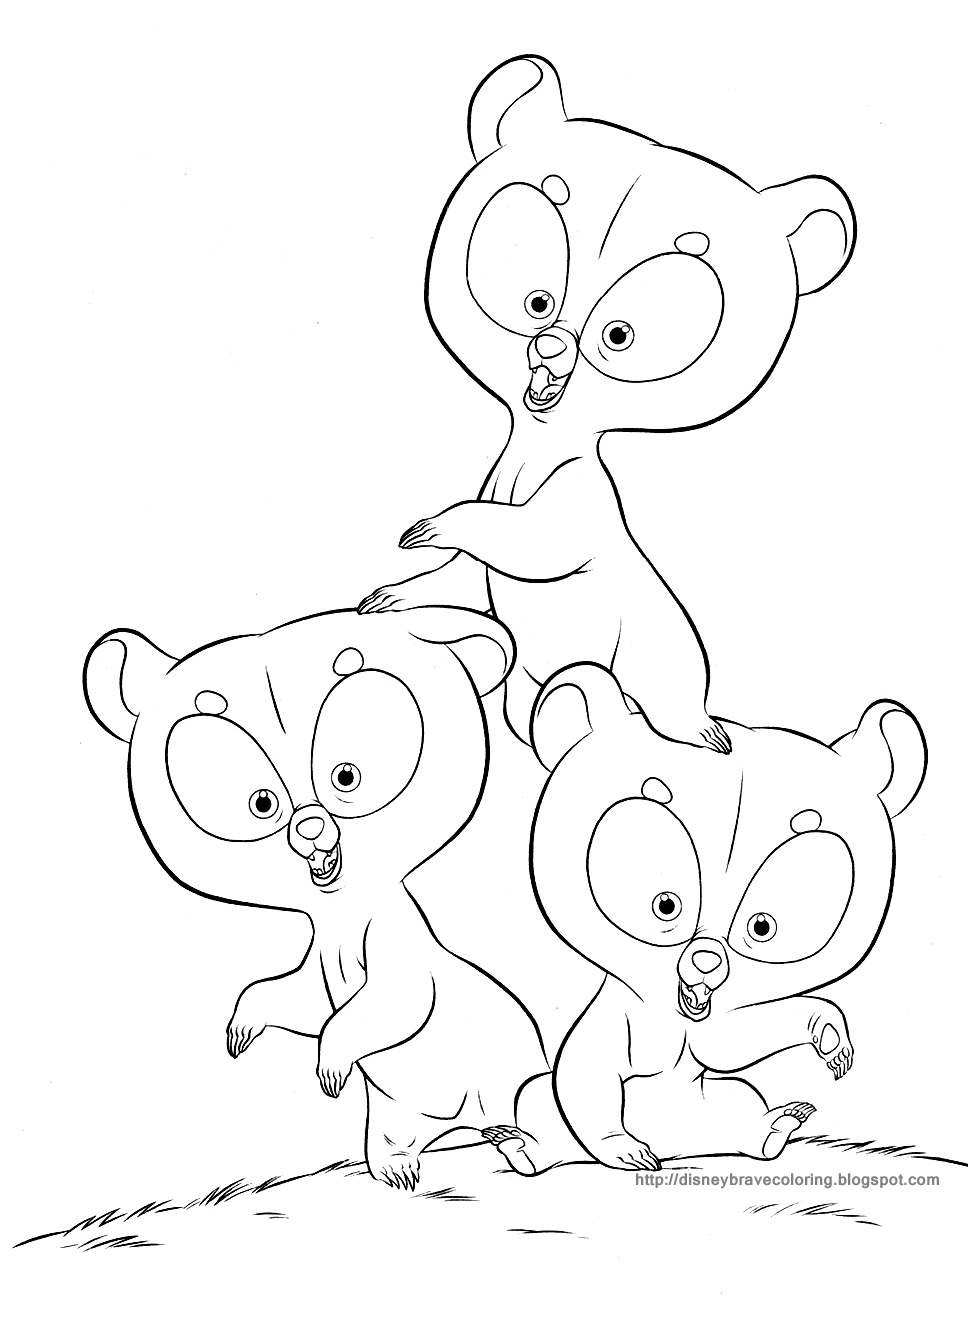 HAMISH HUBERT AND HARRIS COLORING PAGE TRIPLETS BRAVE